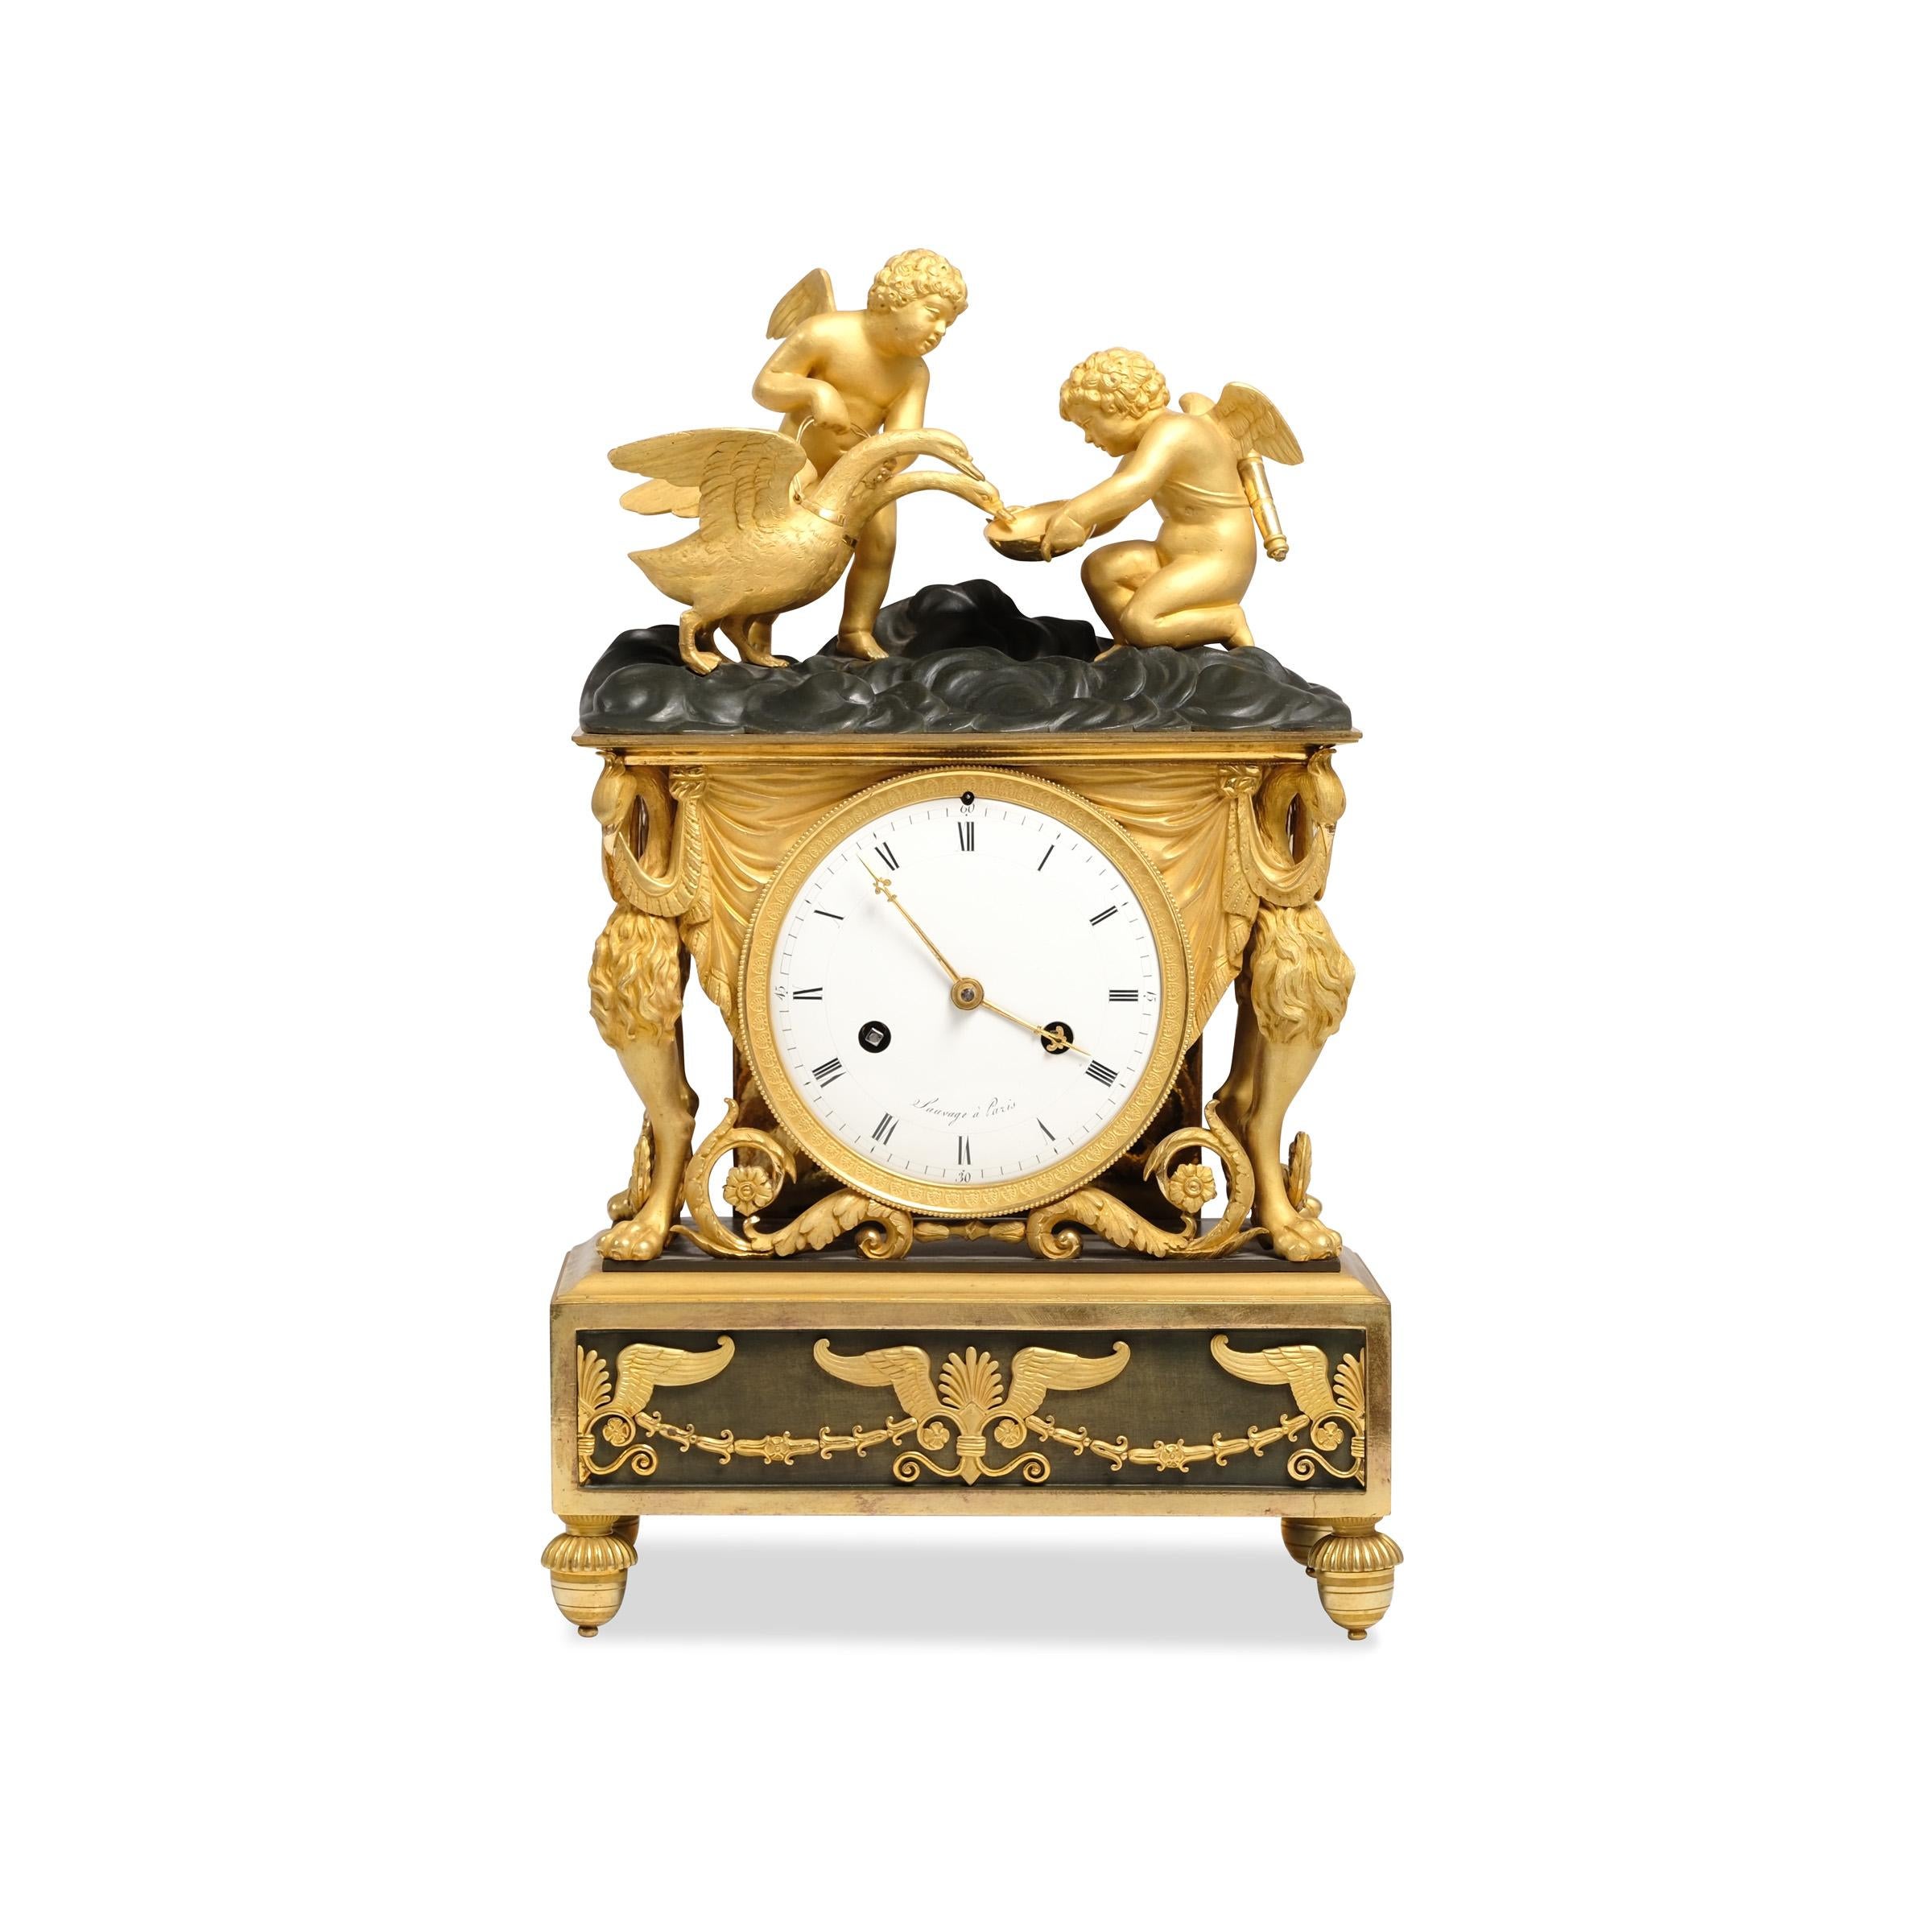 France Directoire Mantle Clock, around 1790/1800, figural depiction of two putti with swans, bronze, fire-gilded and dark patinated, on white enamel dial inscribed 